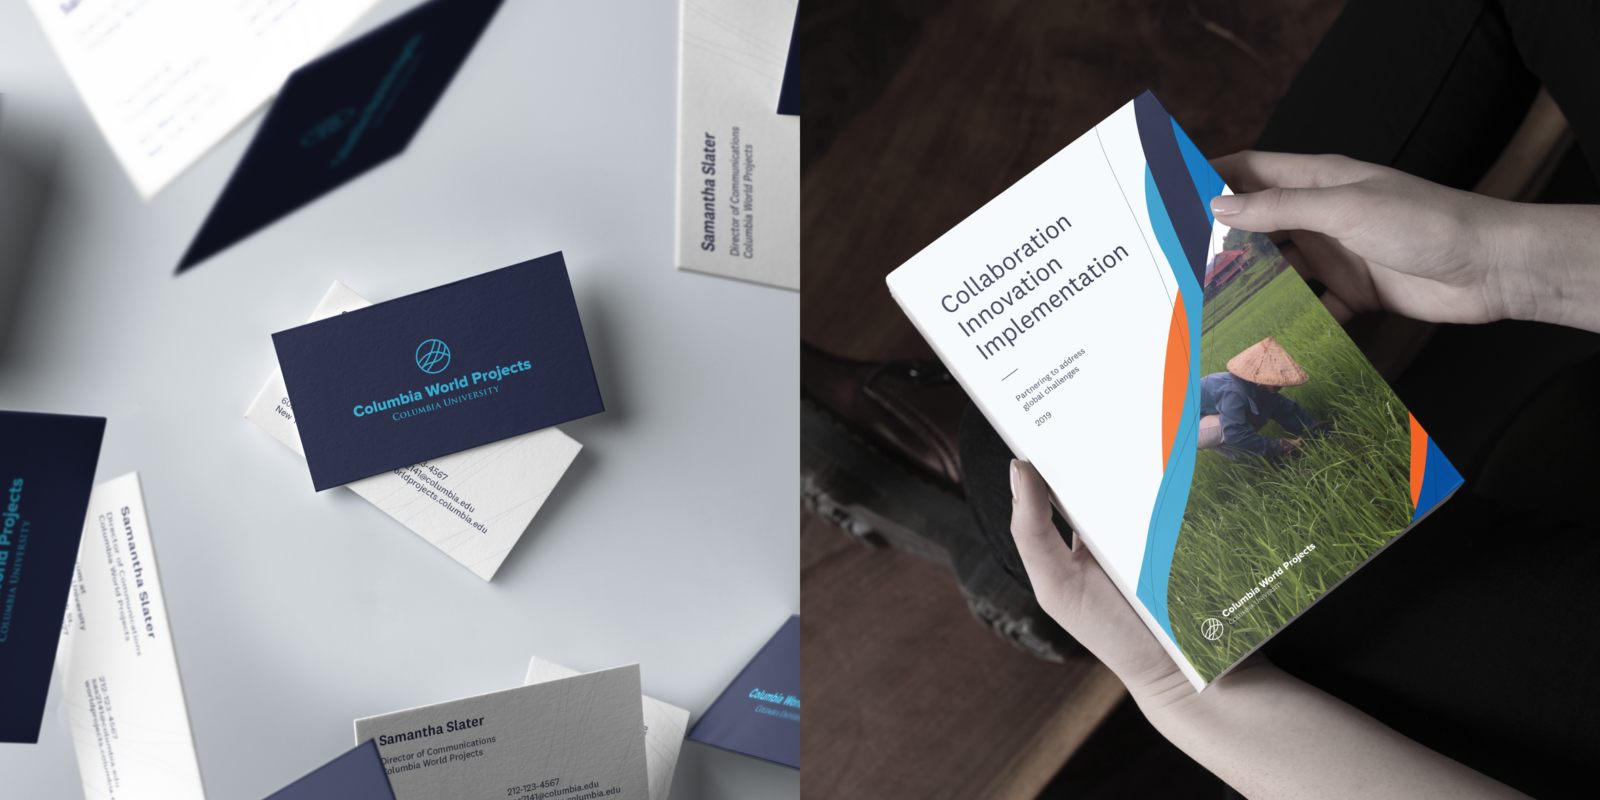 Columbia World Projects business card and booklet